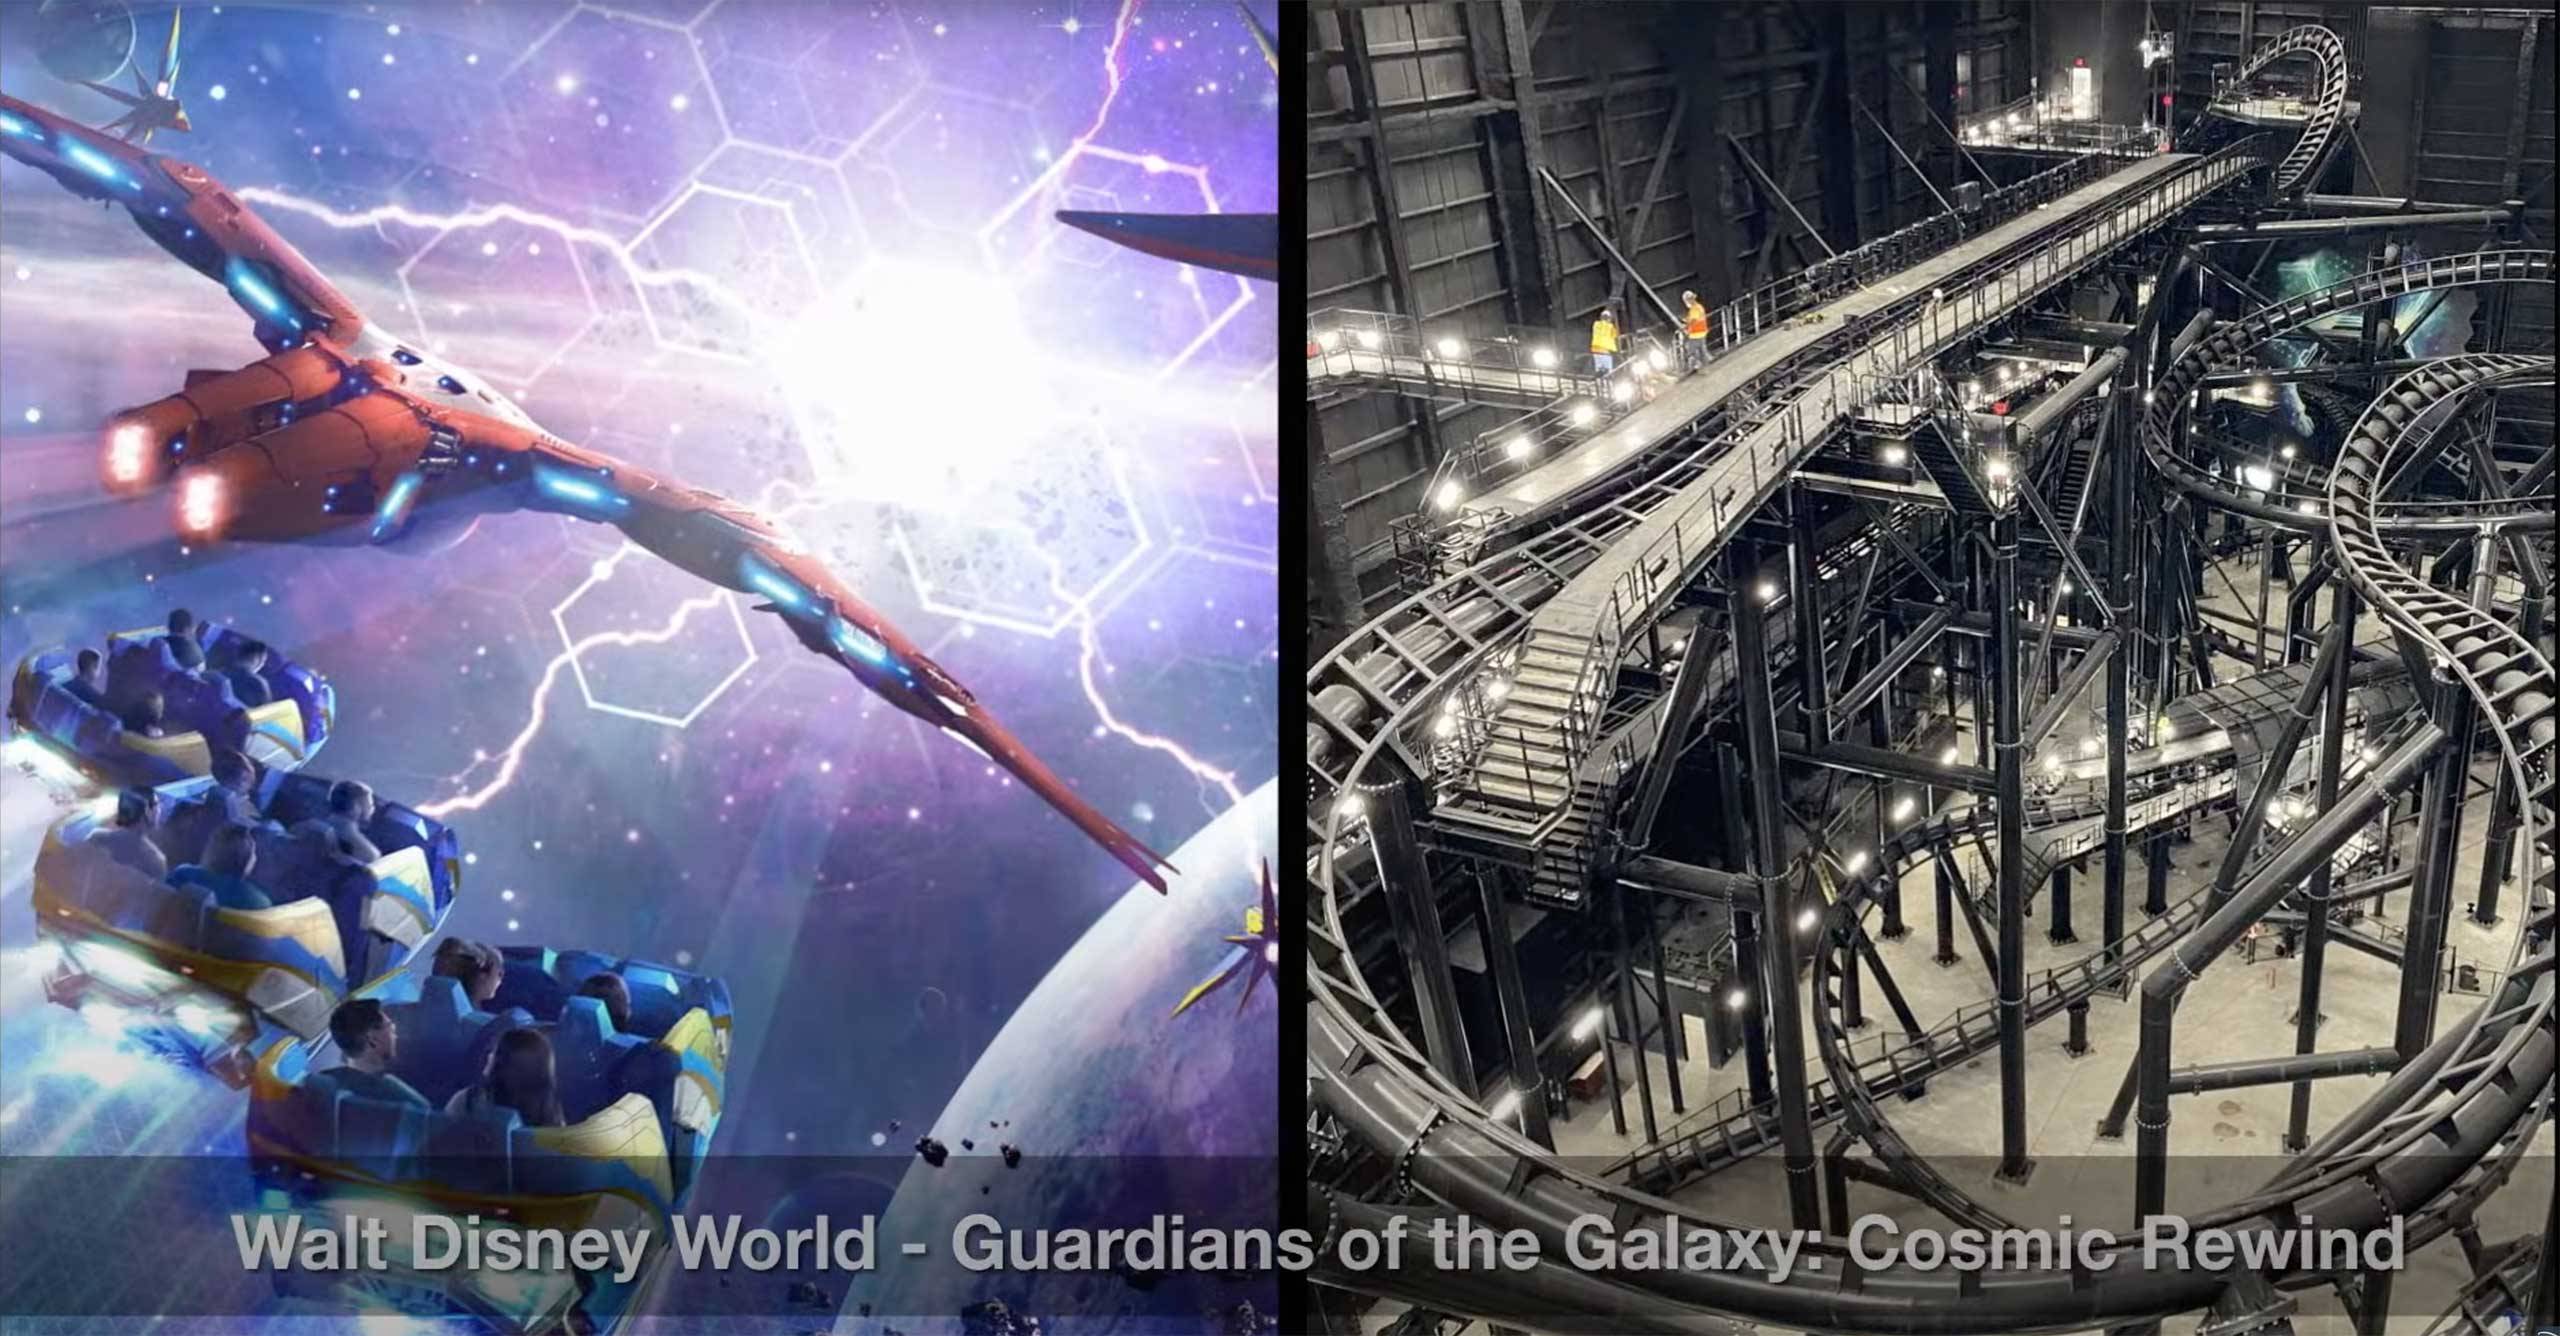 VIDEO - Disney shows off Guardians of the Galaxy coaster ride system in testing